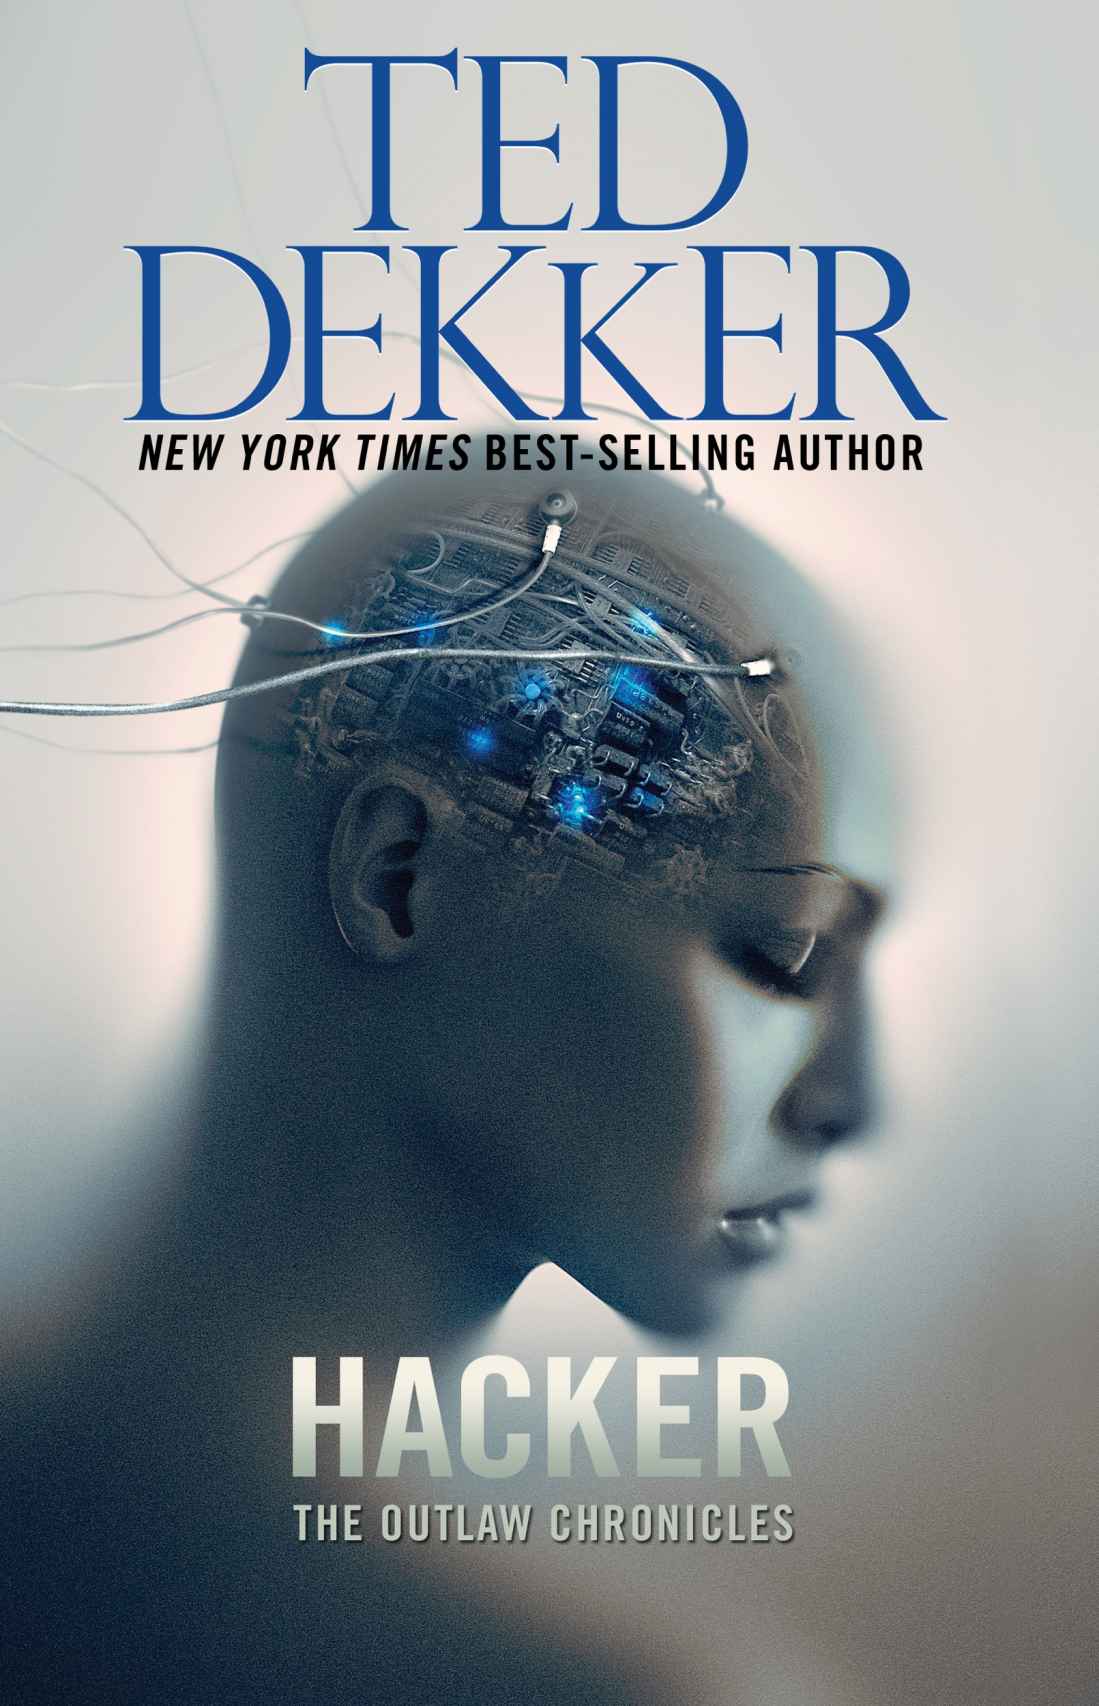 Hacker: The Outlaw Chronicles by Ted Dekker